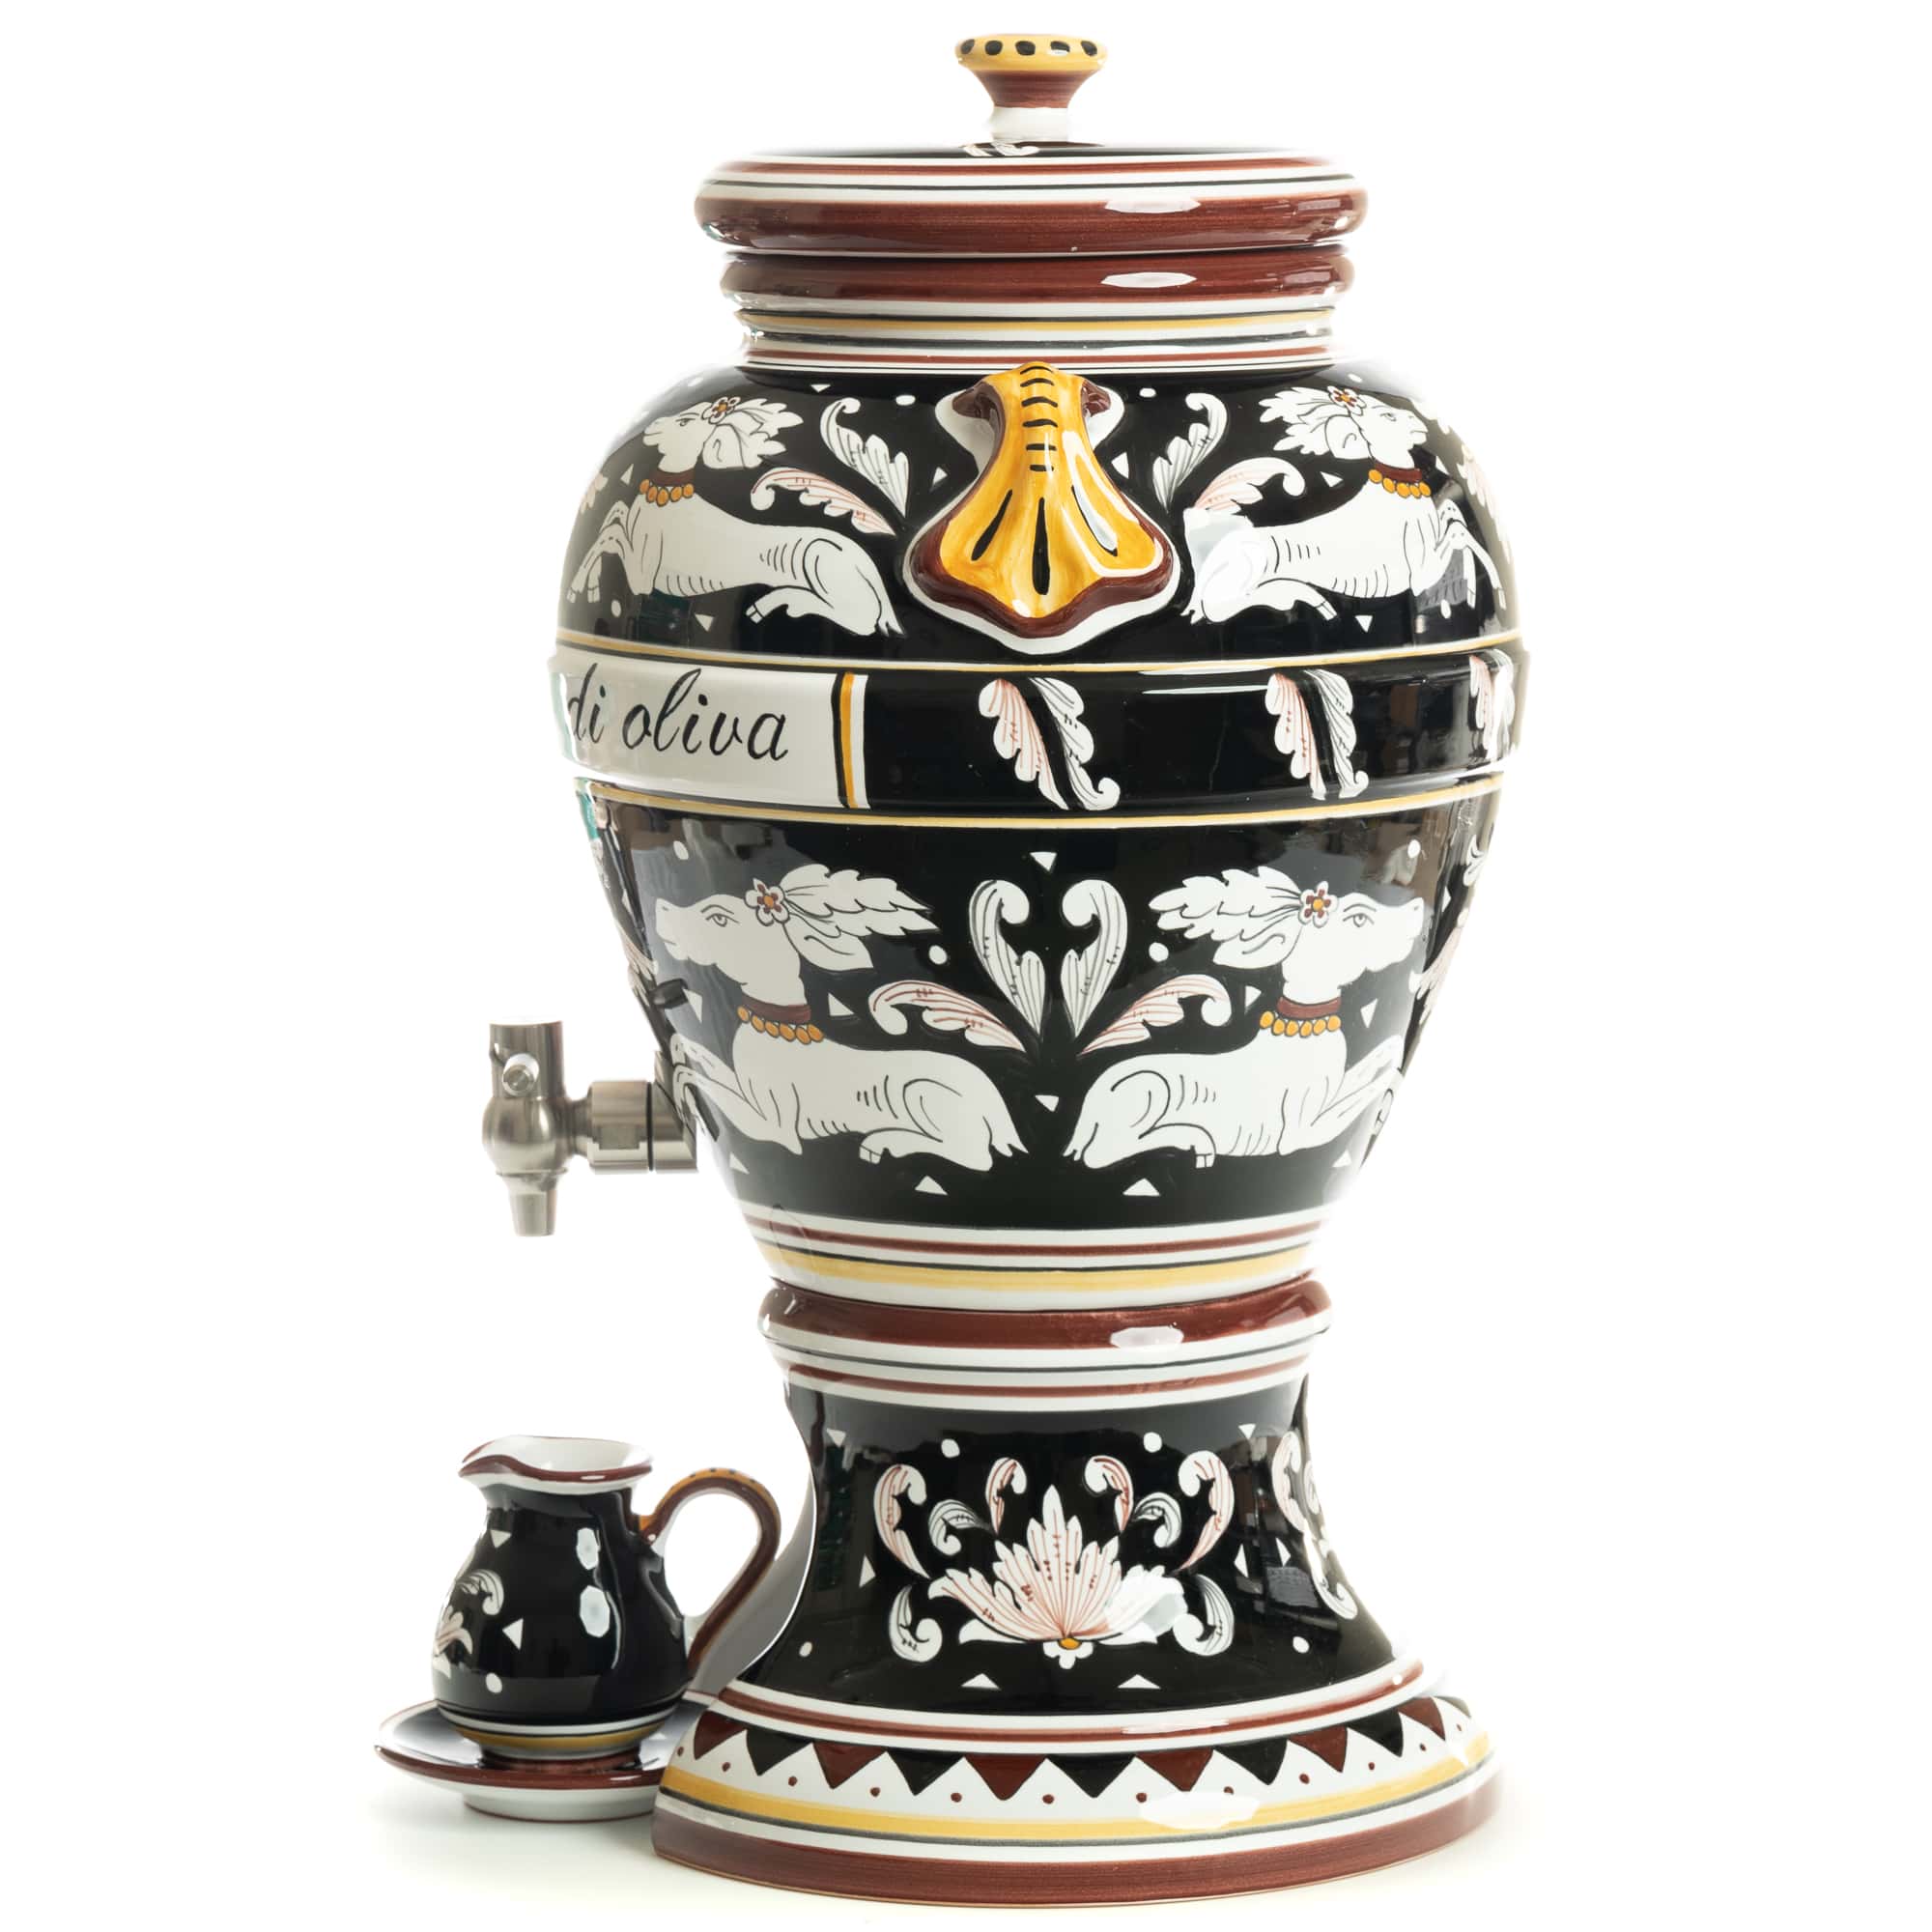 Siena Beverage & Olive Oil Dispenser, ceramics, pottery, italian design, majolica, handmade, handcrafted, handpainted, home decor, kitchen art, home goods, deruta, majolica, Artisan, treasures, traditional art, modern art, gift ideas, style, SF, shop small business, artists, shop online, landmark store, legacy, one of a kind, limited edition, gift guide, gift shop, retail shop, decorations, shopping, italy, home staging, home decorating, home interiors